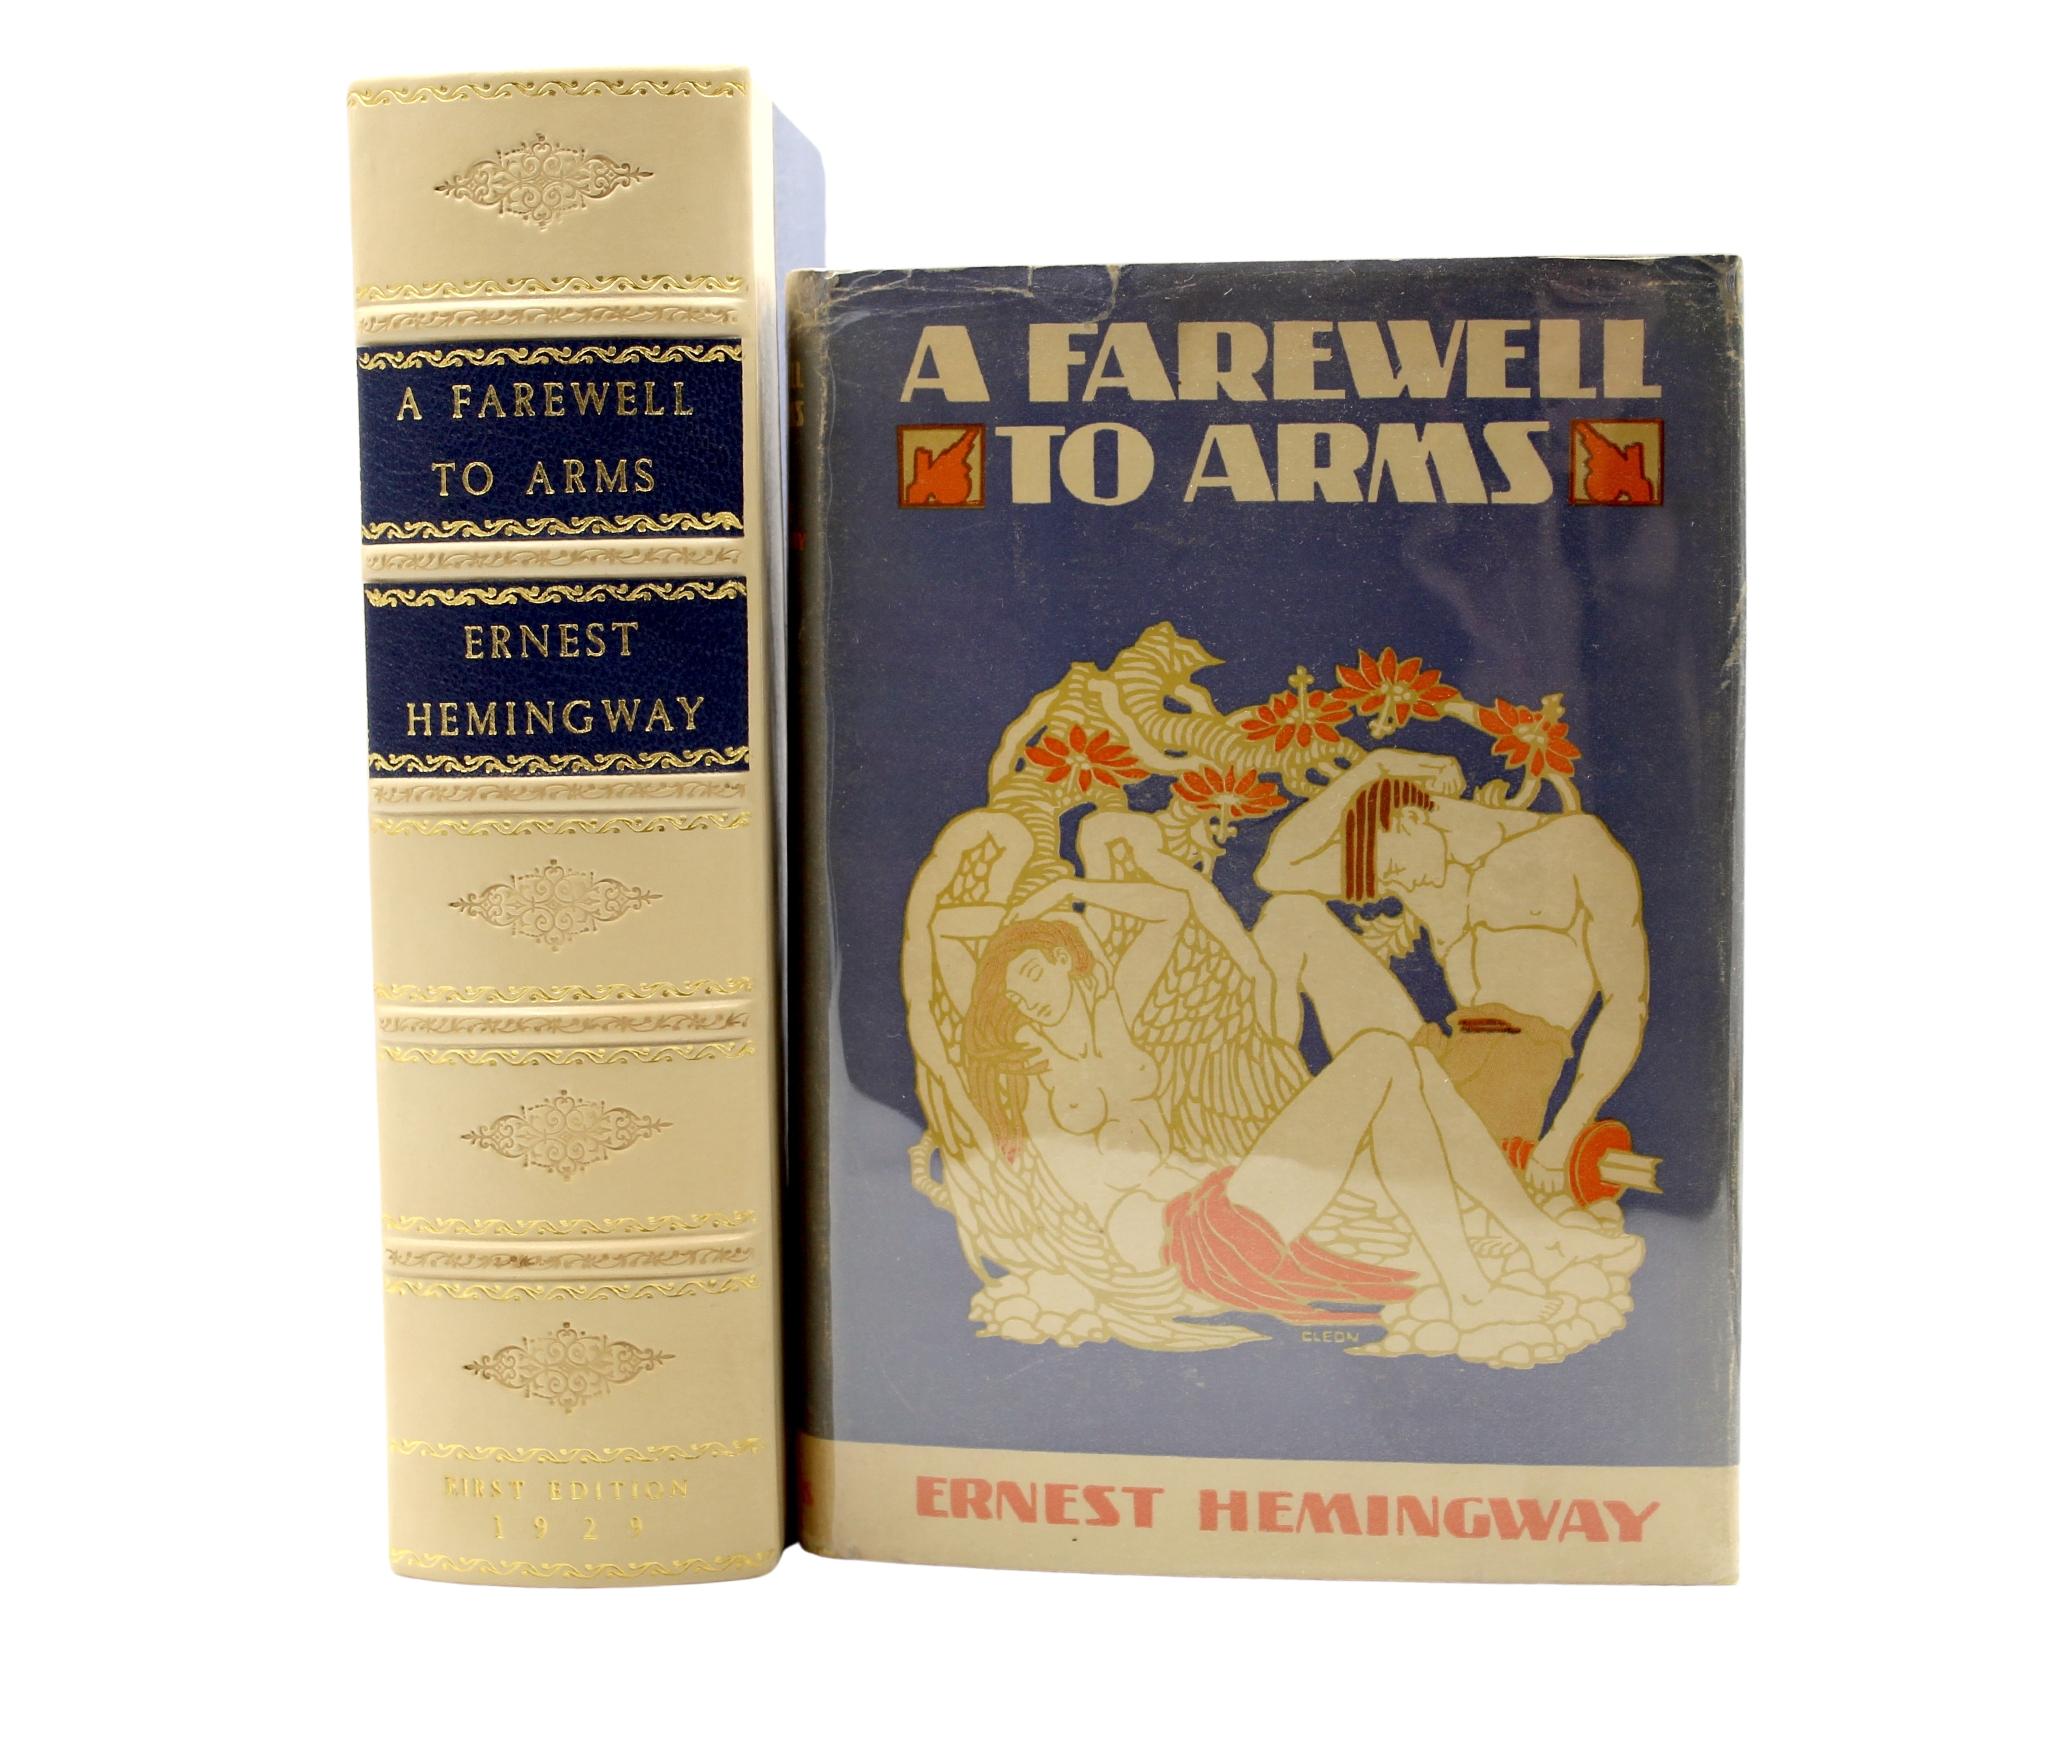 what was hemingway's first book